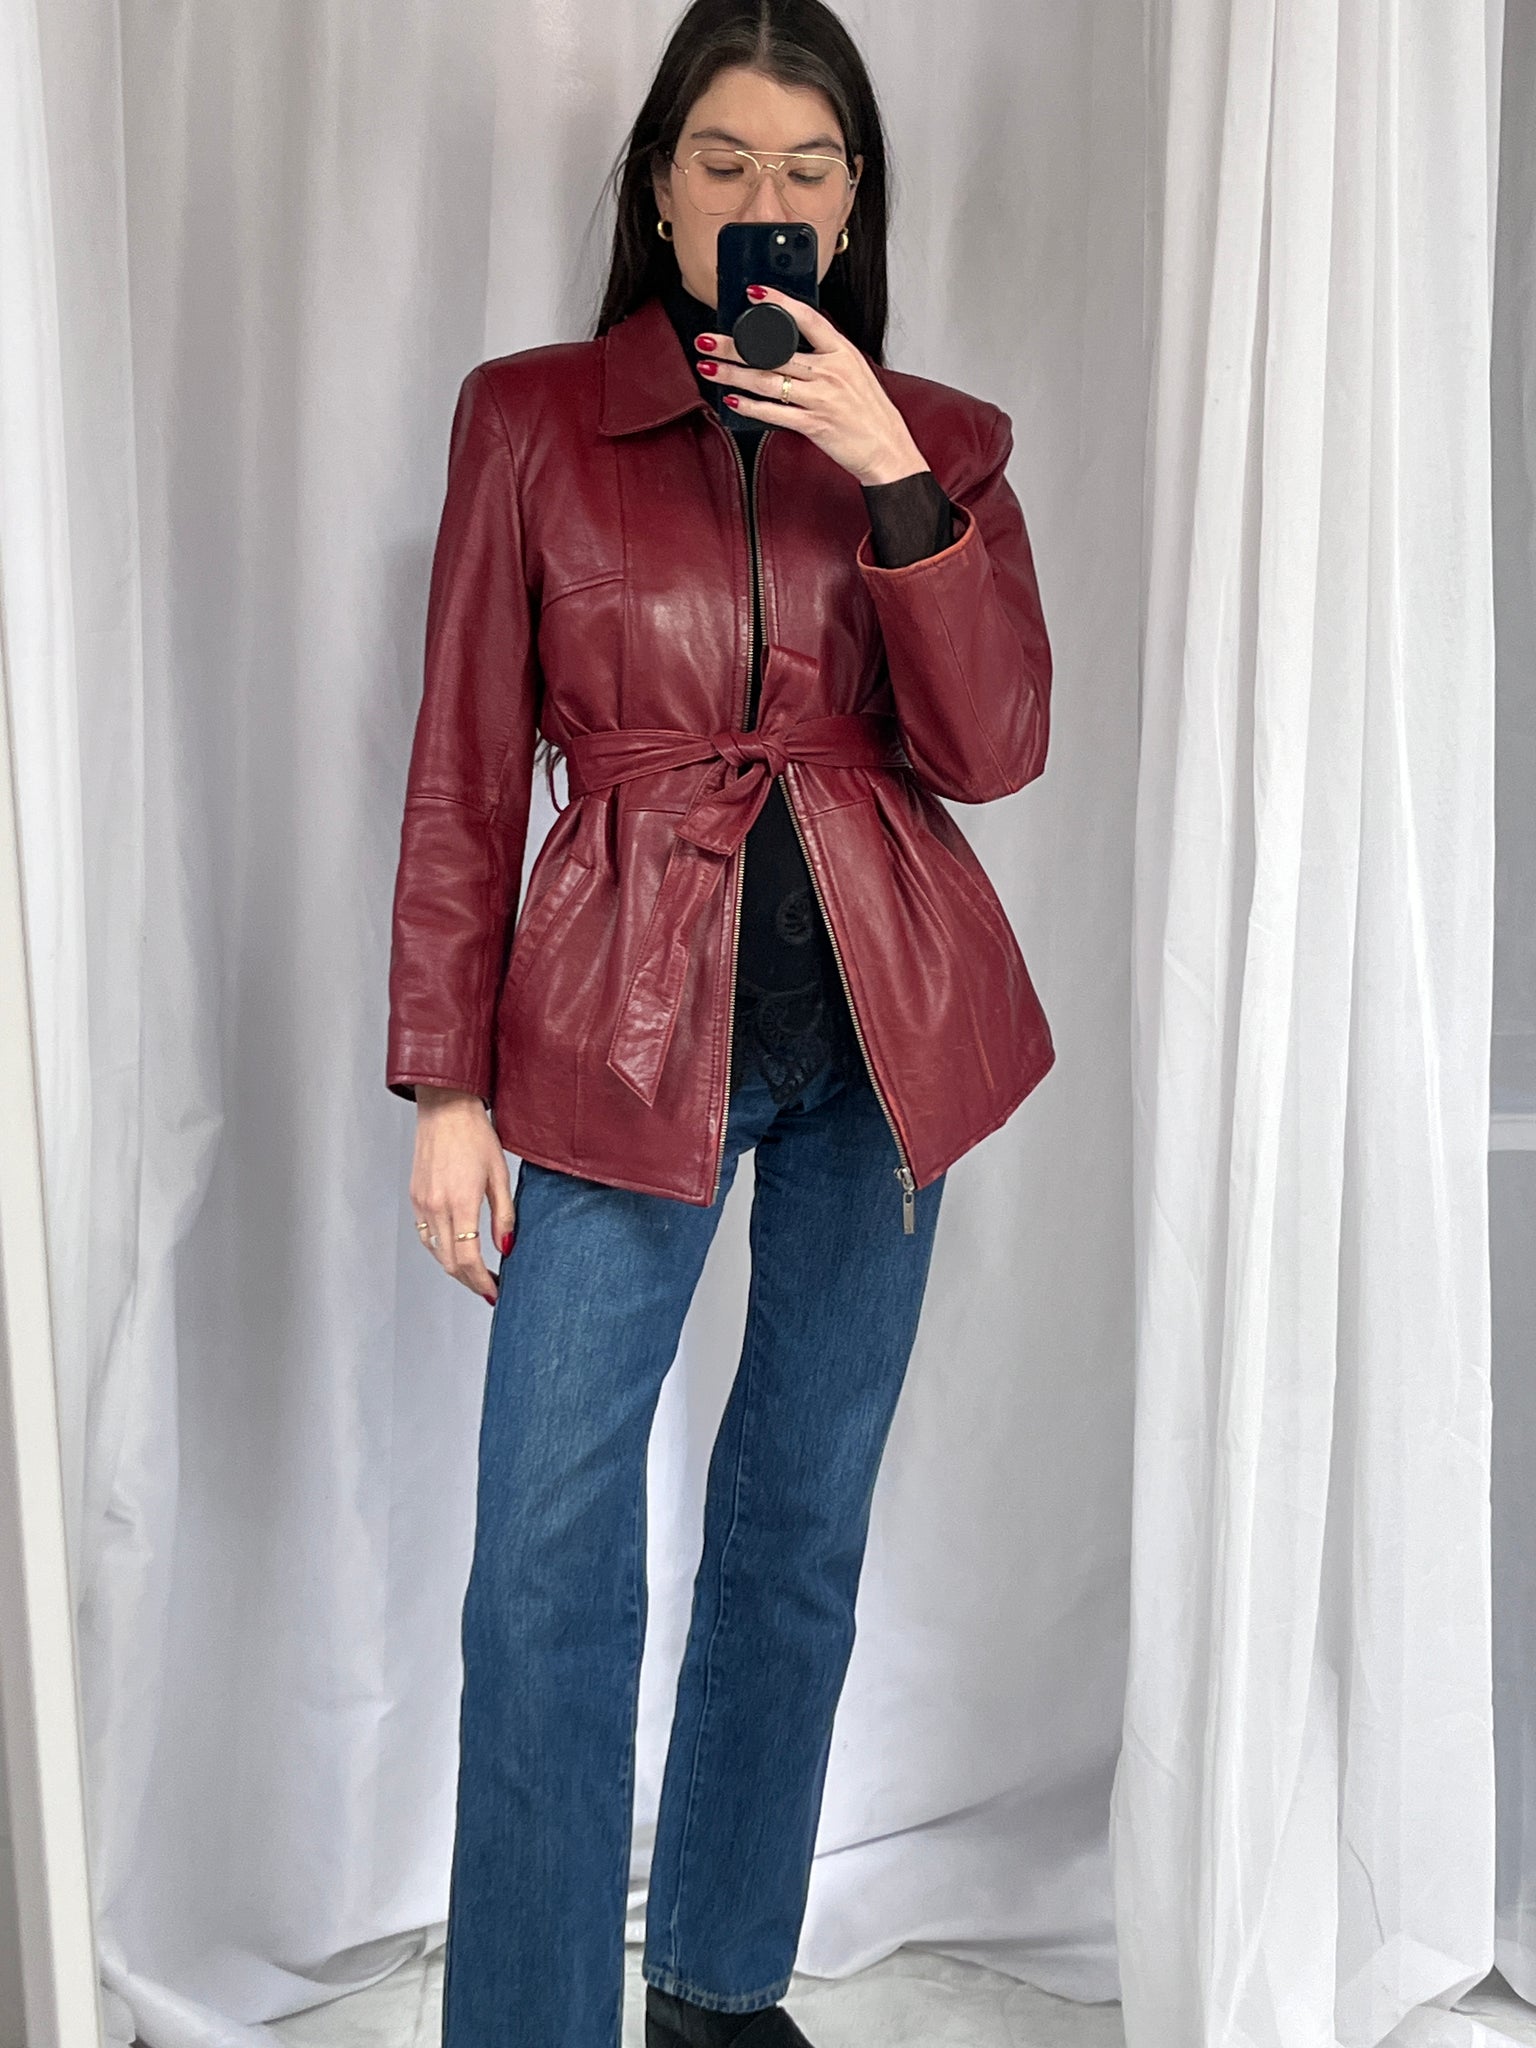 Vintage faded red leather jacket